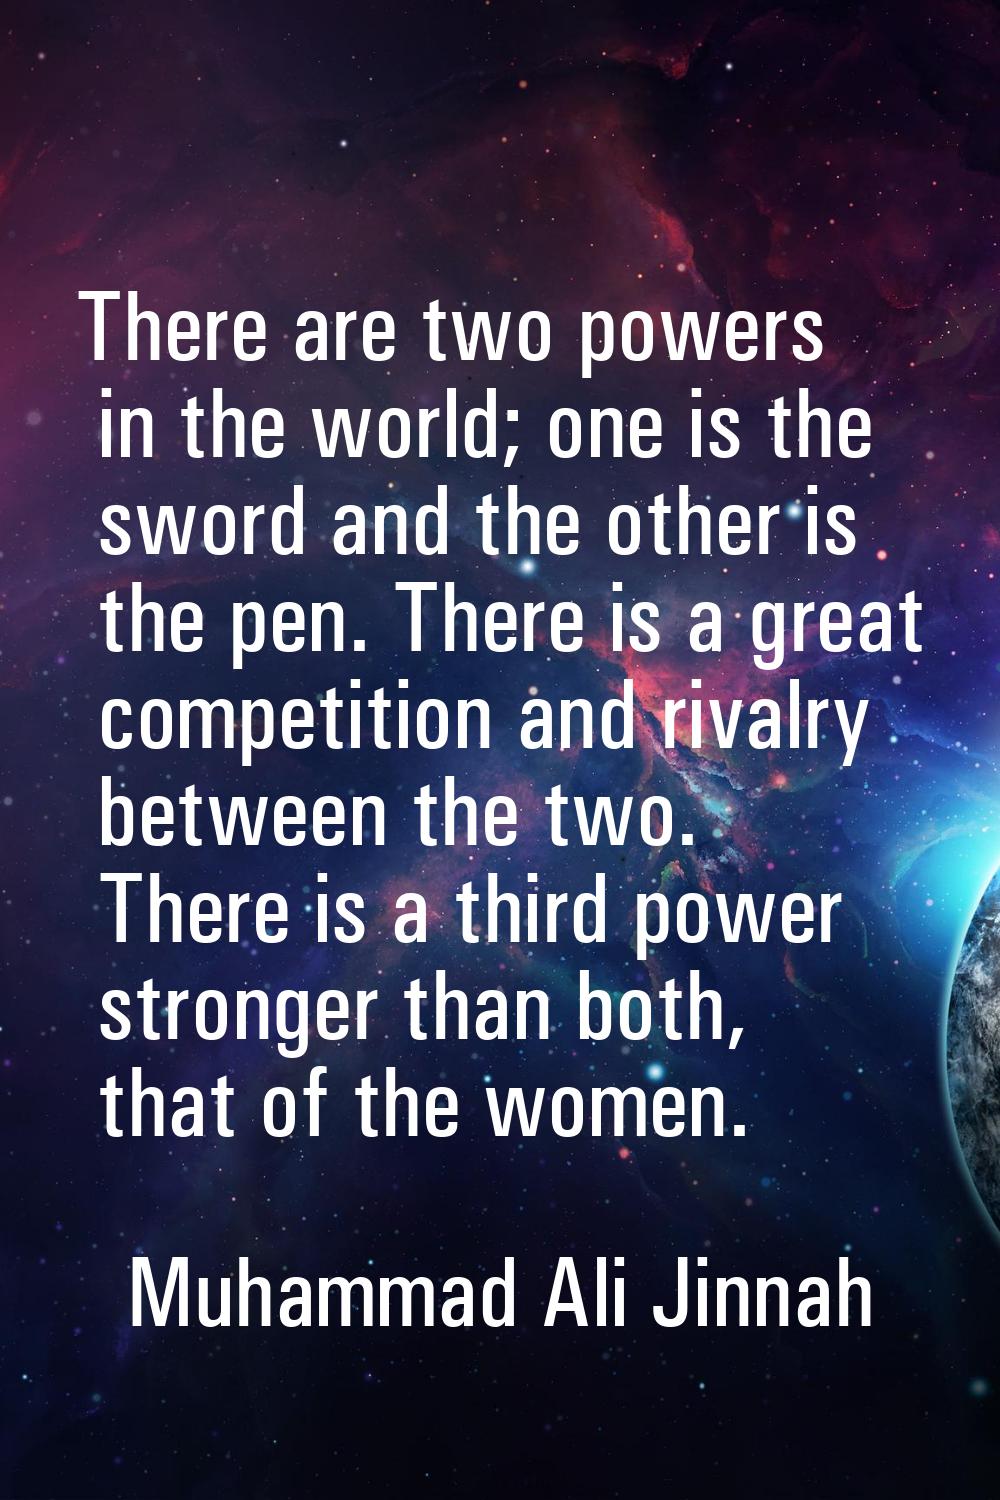 There are two powers in the world; one is the sword and the other is the pen. There is a great comp